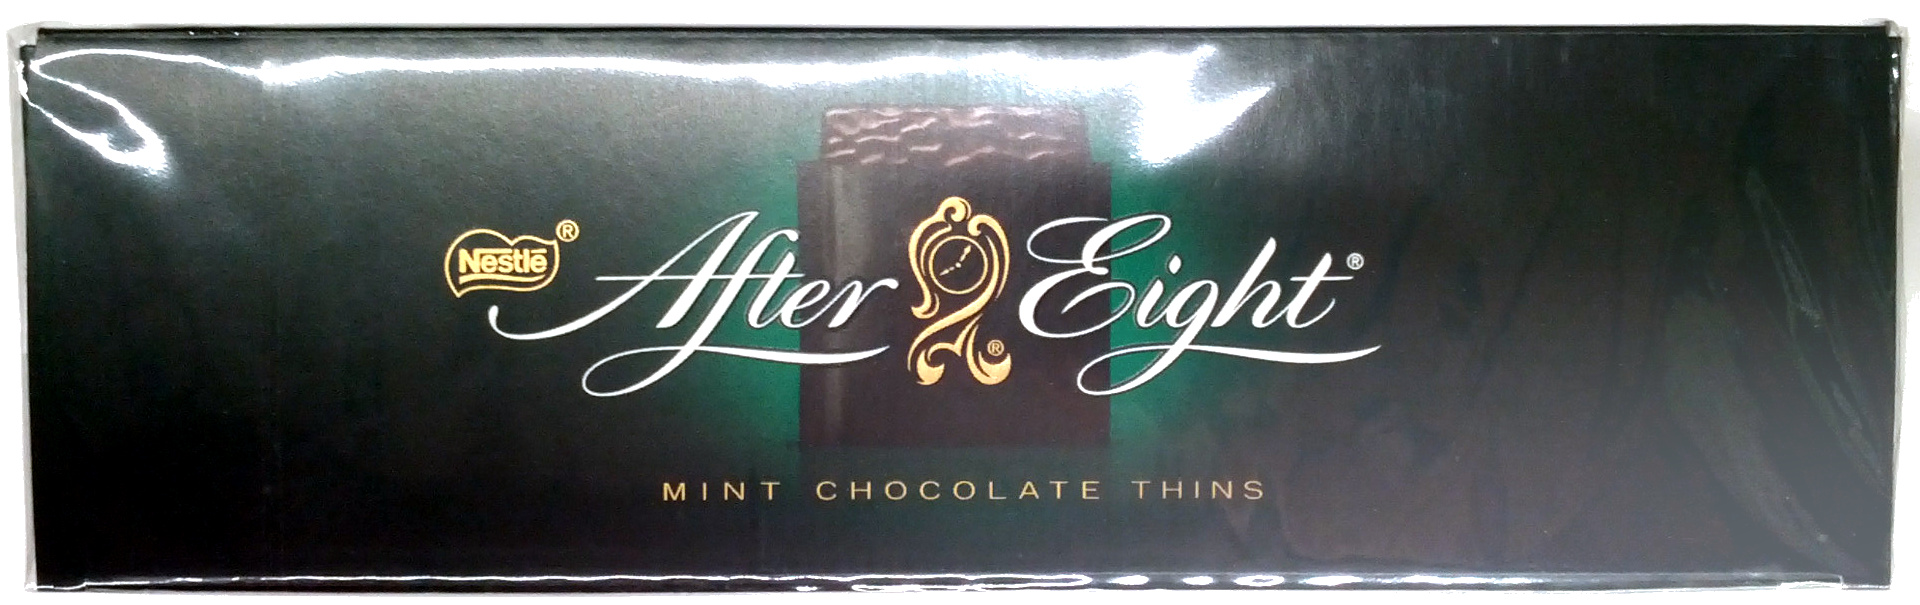 AFTER EIGHT Coffret 300g - Product - en